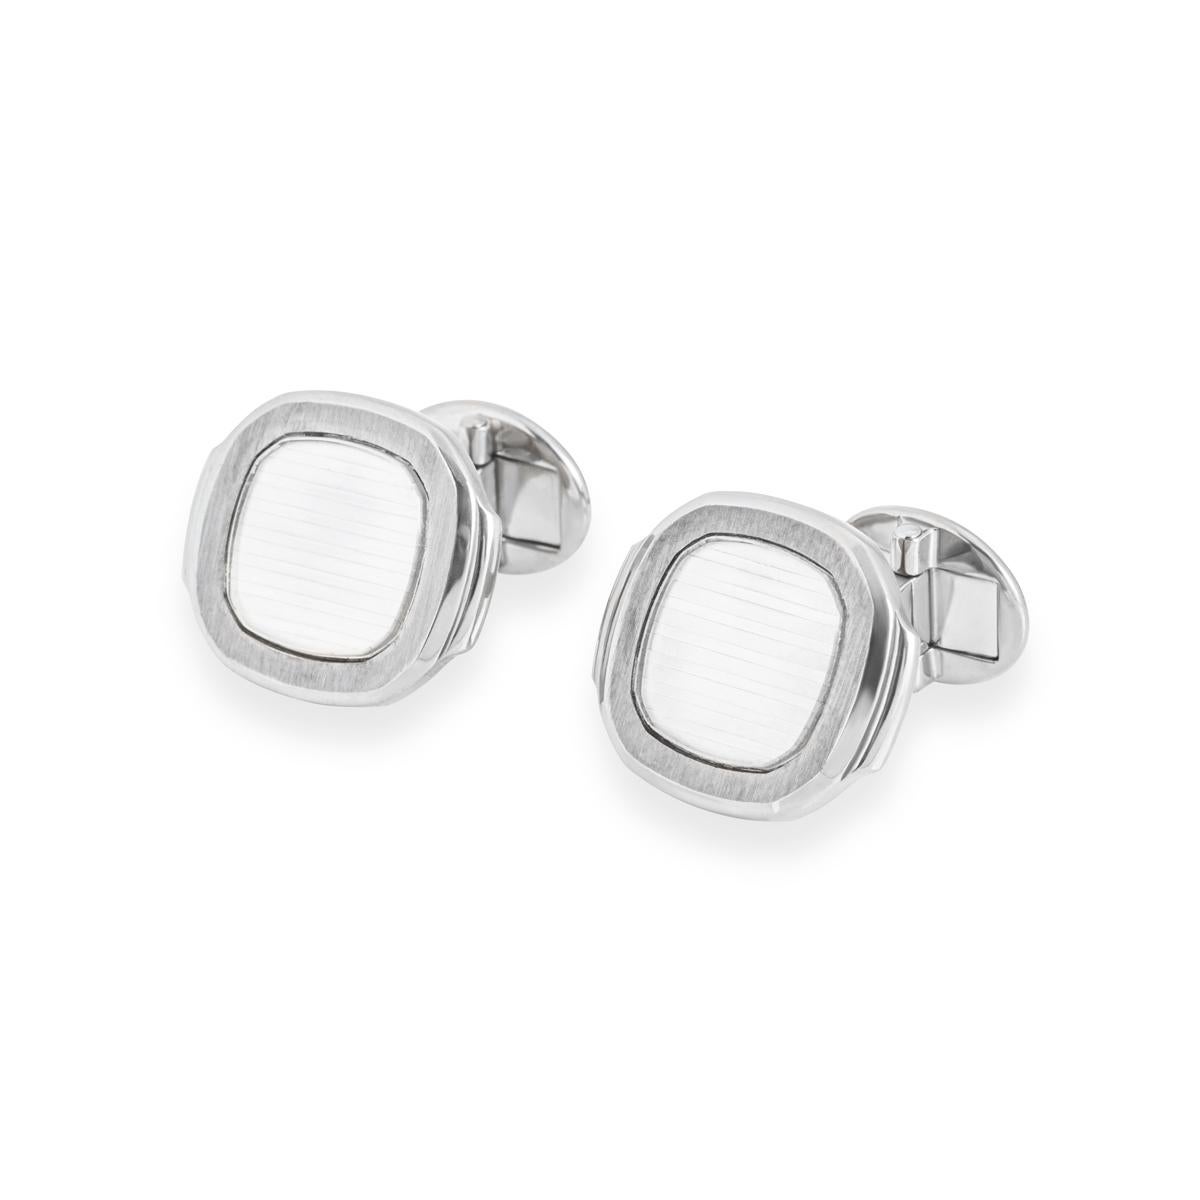 A stylish pair of 18k white gold cufflinks by Patek Philippe from the Nautilus collection. The cufflinks are set with a silvery-white Nautilus panel surrounded by a satin finish border. The cufflinks measure 2.2 cm in length, 1.9 cm in width and